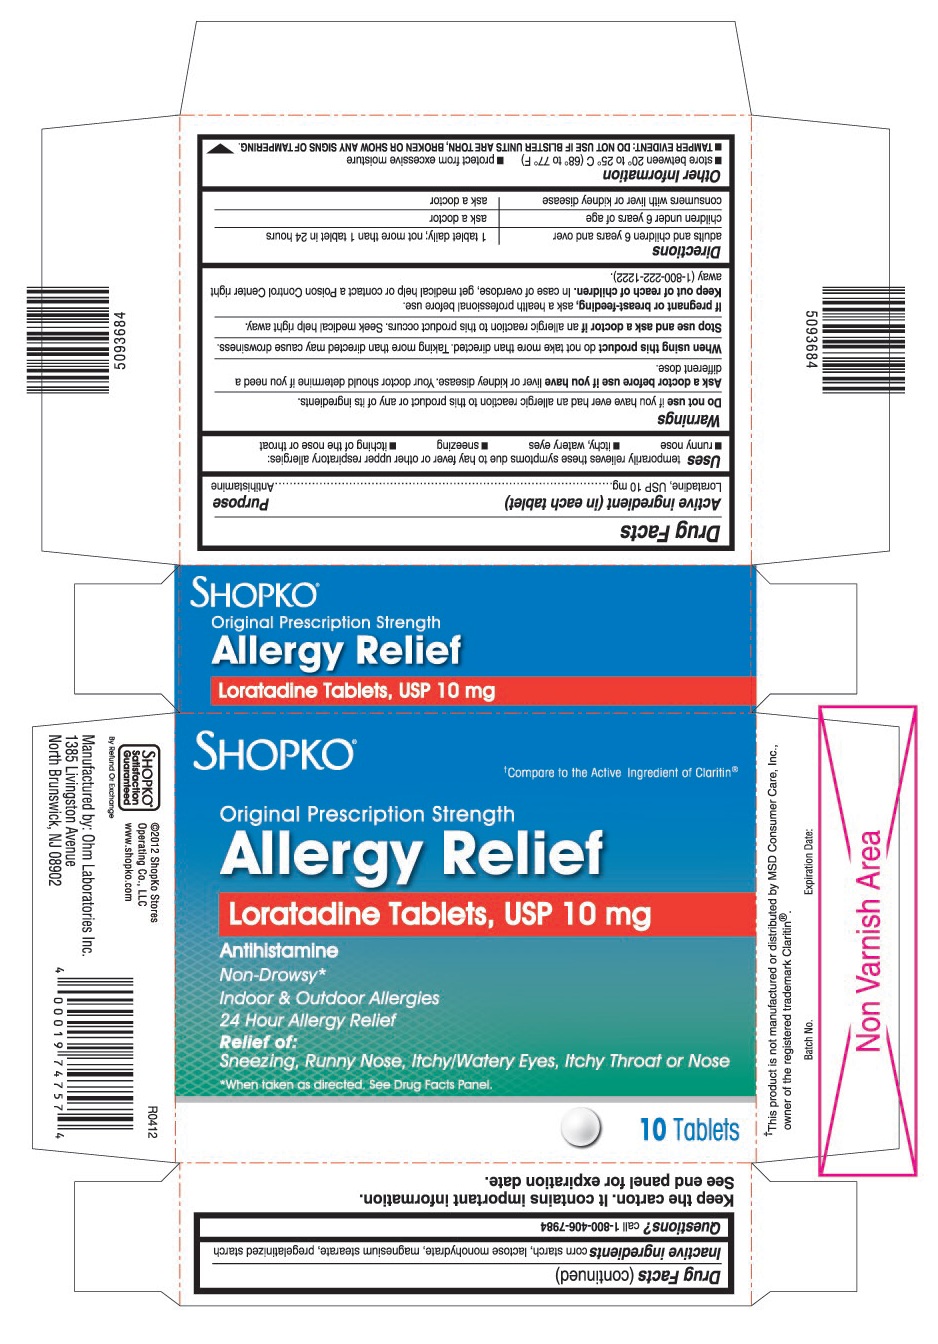 This is the 10 count blister carton label for Shopko Loratadine tablets, USP 10 mg